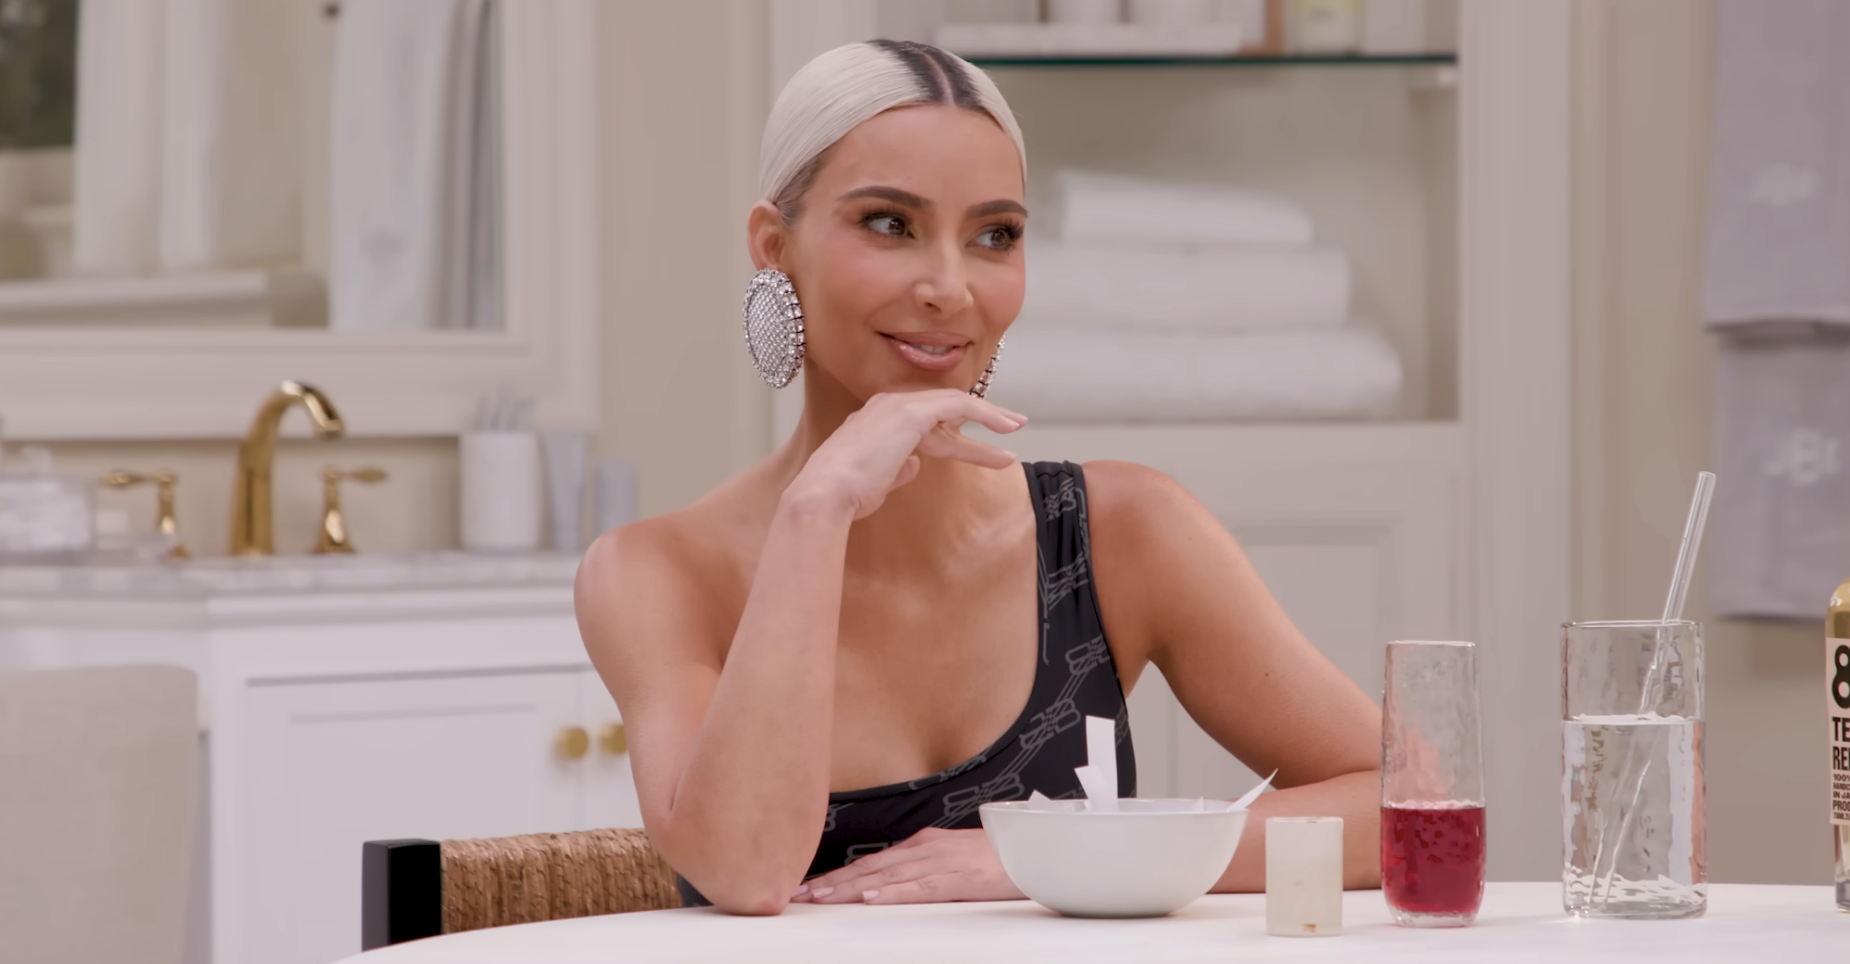 Kim sitting at a dinner table